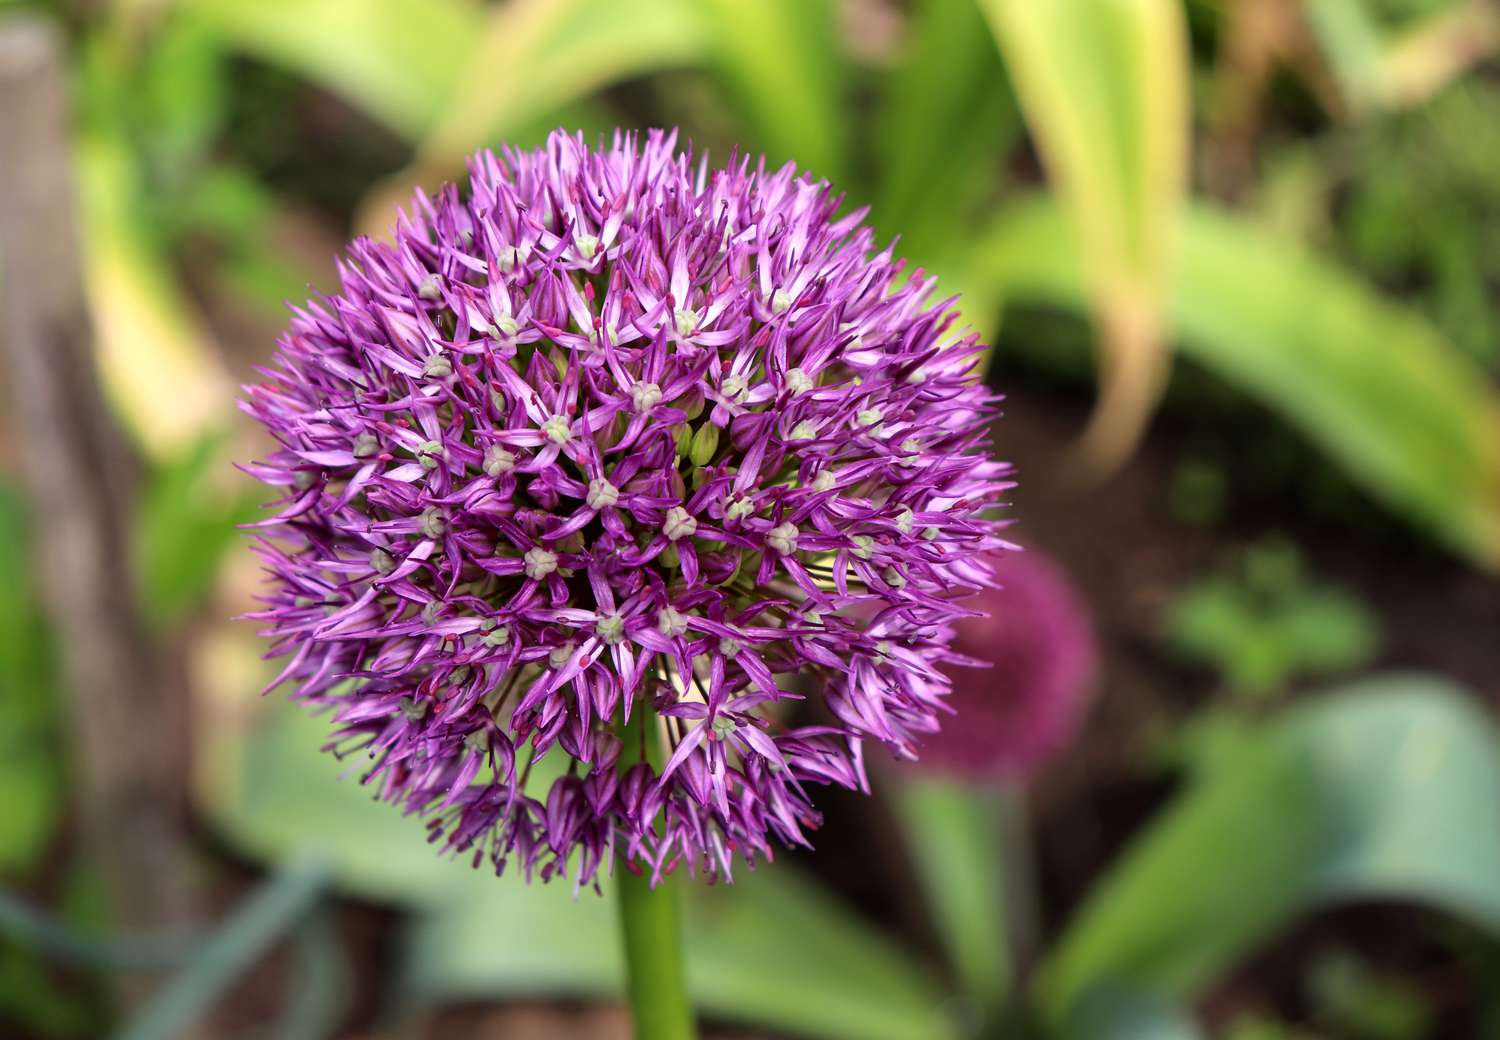 'Early Emperor' allium with purple flowers